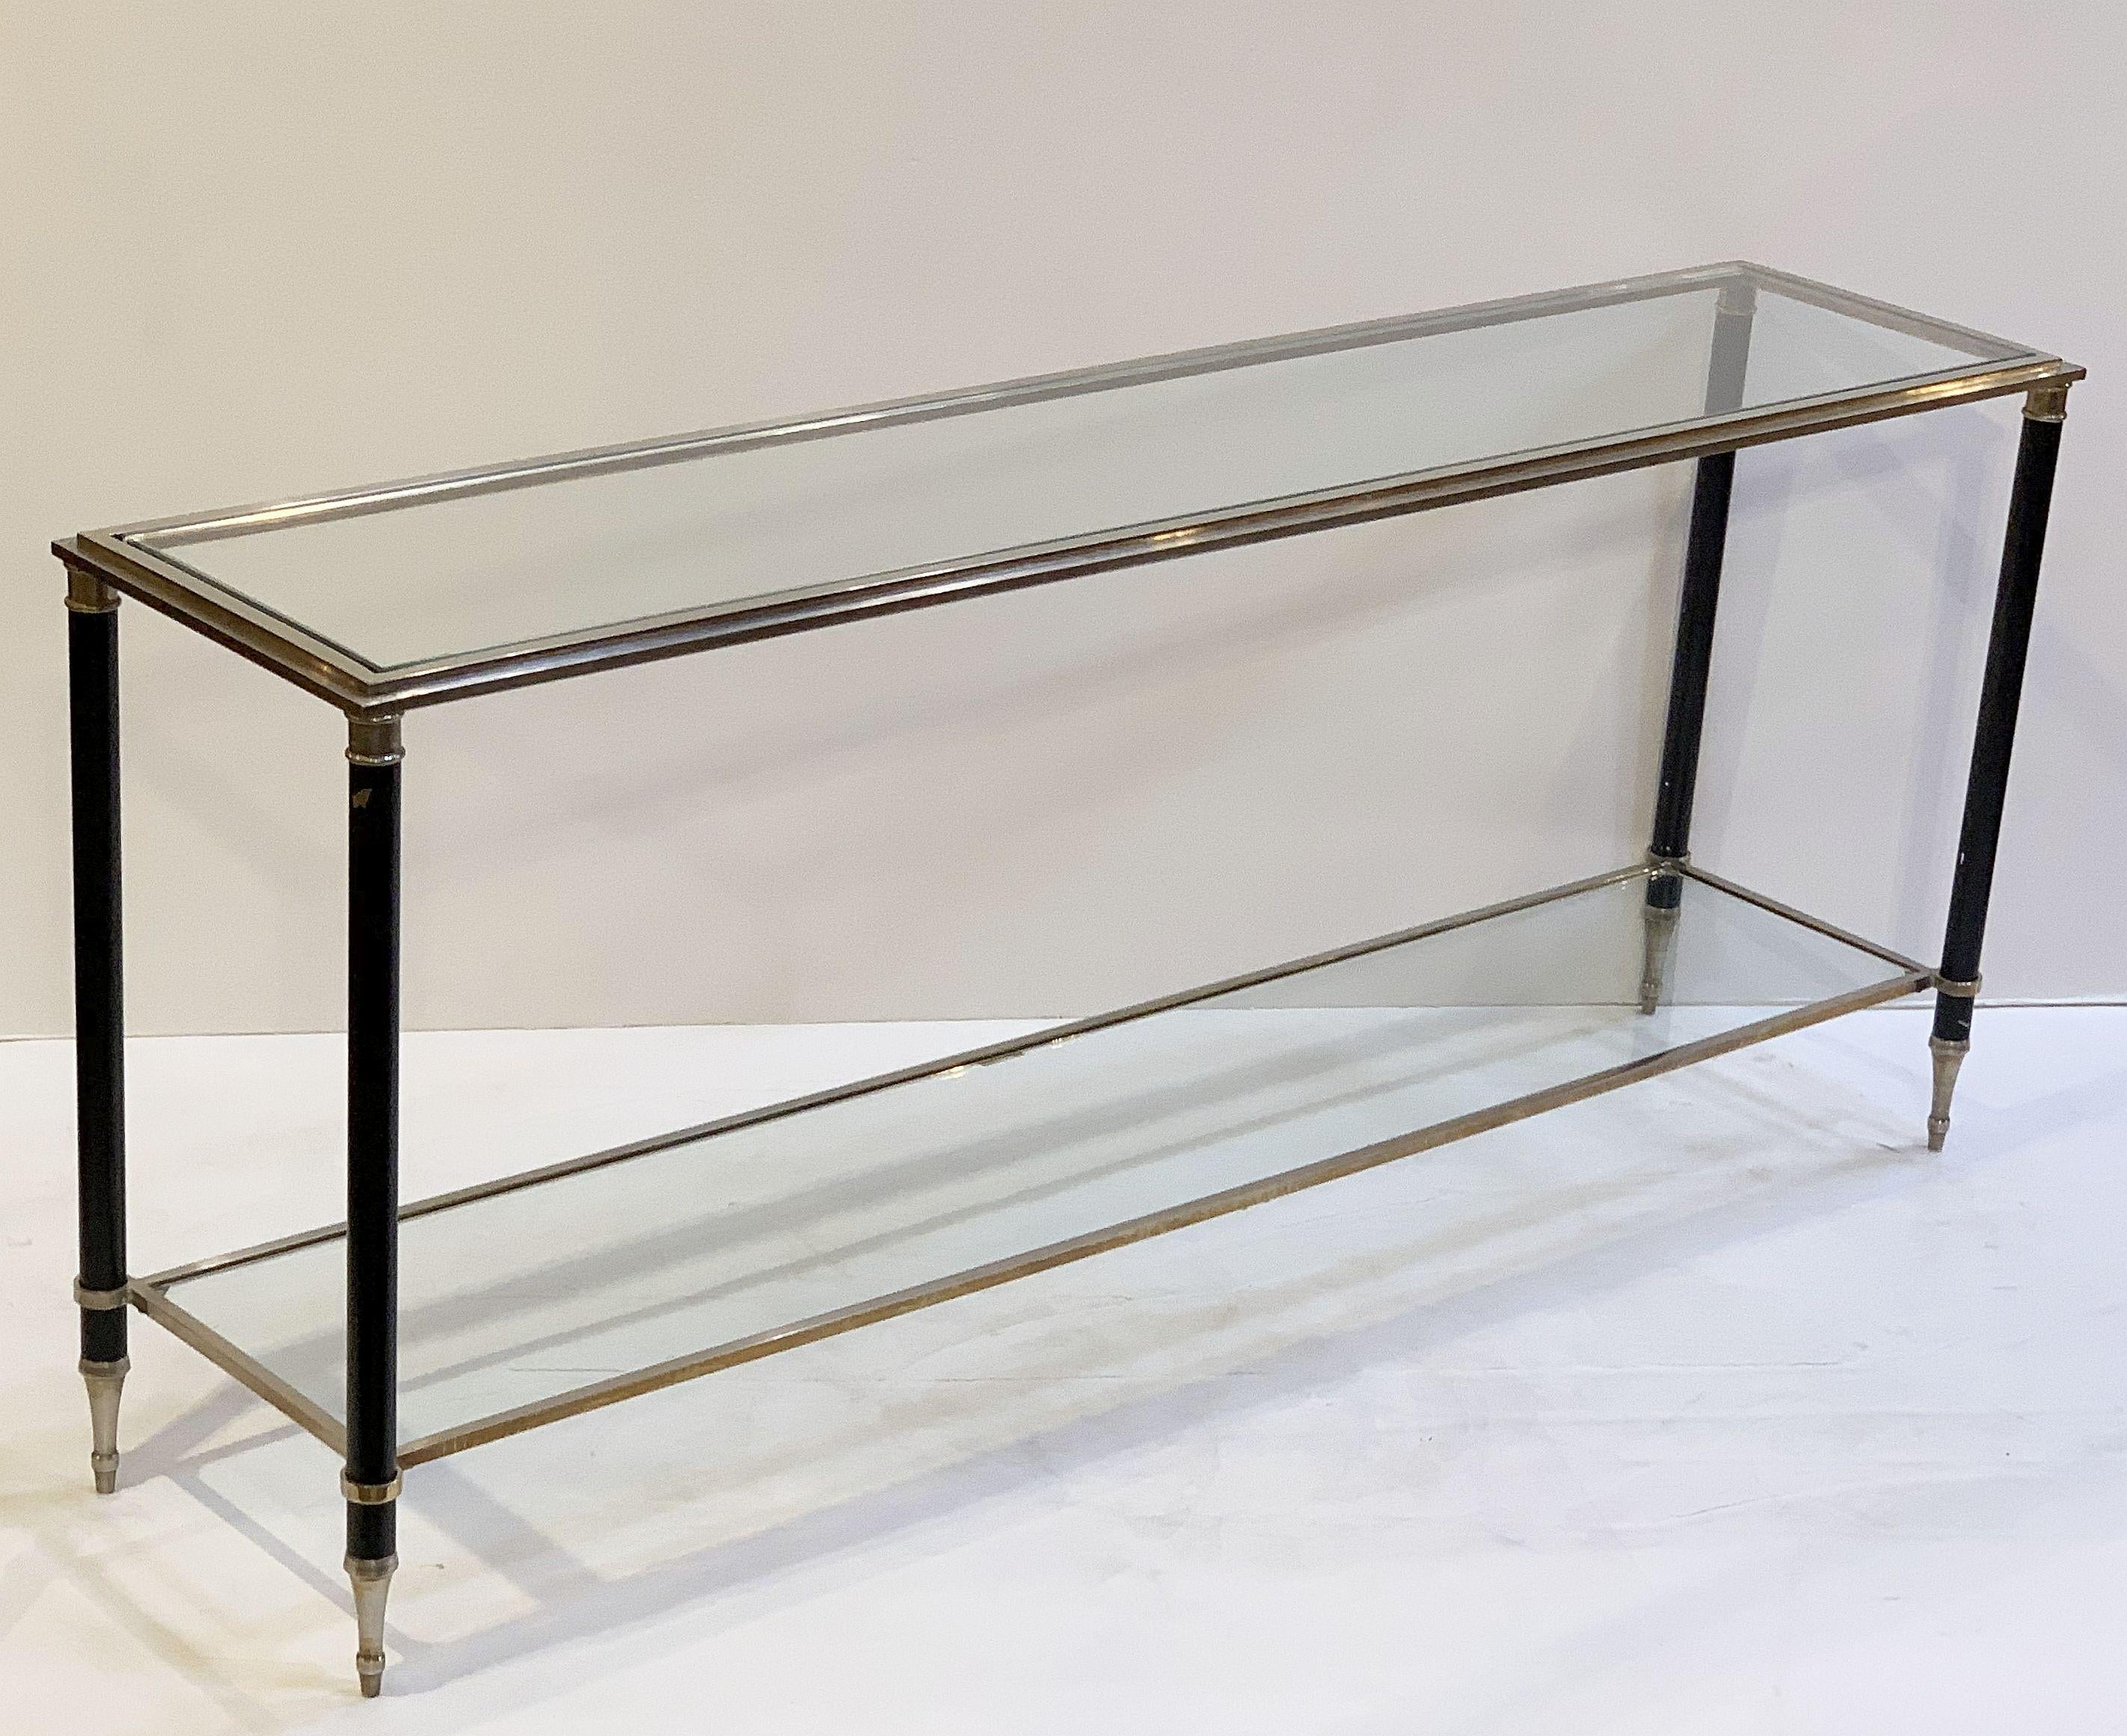 Modern French Two-Tiered Console Table of Nickel, Brass, and Glass